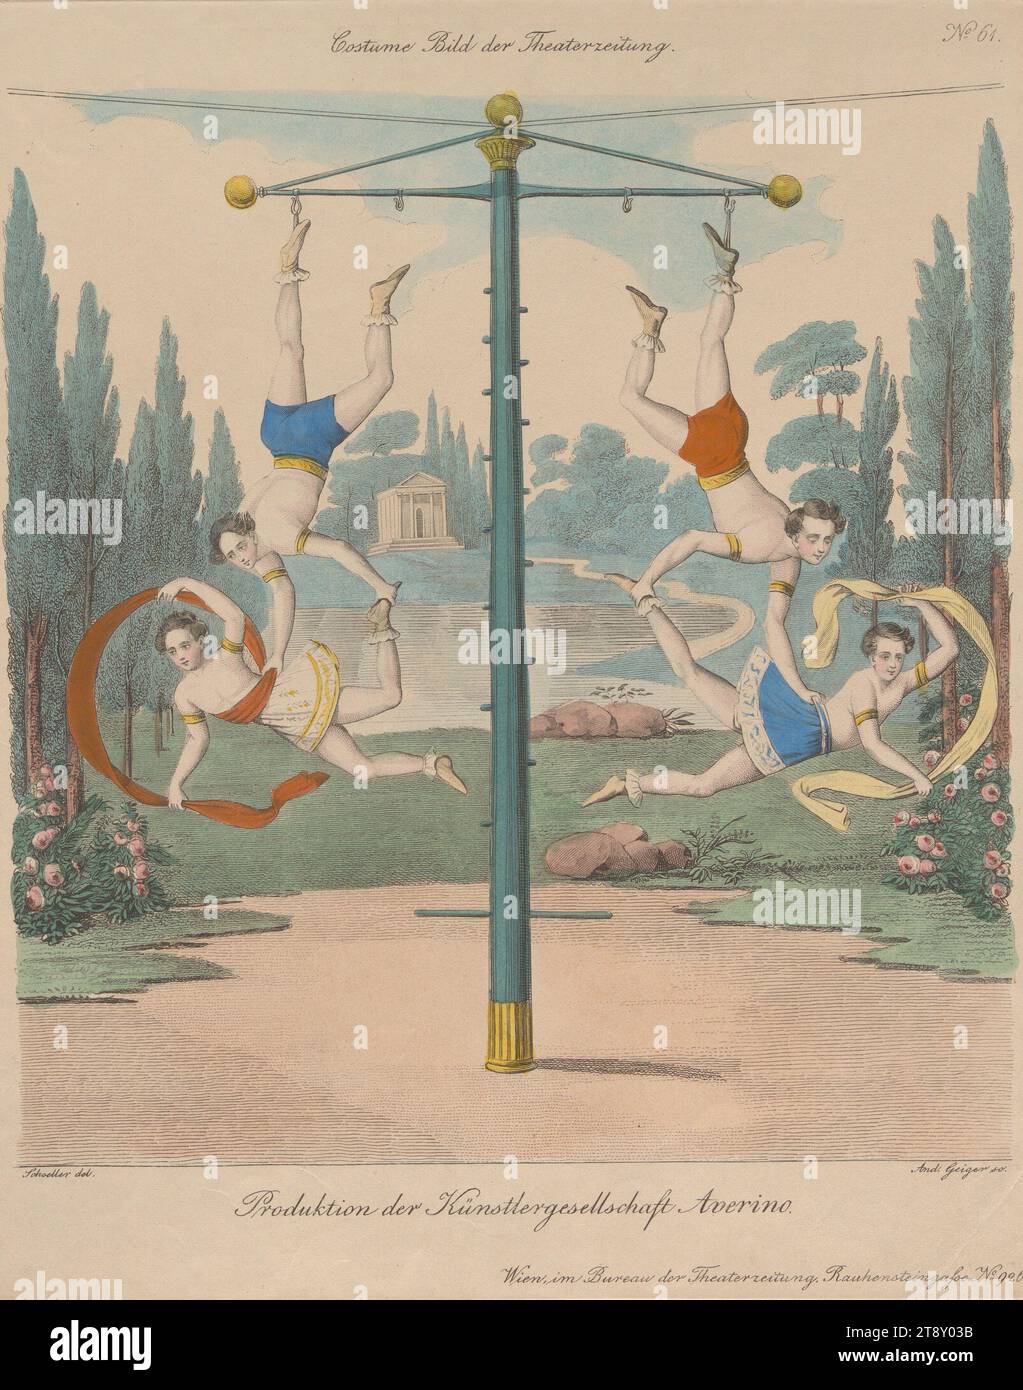 Production of the artist community Averino (costume picture No. 61 for the theater newspaper), Andreas Geiger (1765-1856), copper engraver, 1838, paper, colorised, copperplate engraving, sheet size 27, 6×22, 2 cm, Theatre, Performing arts, Fine Arts, actor (on the stage), The Vienna Collection Stock Photo